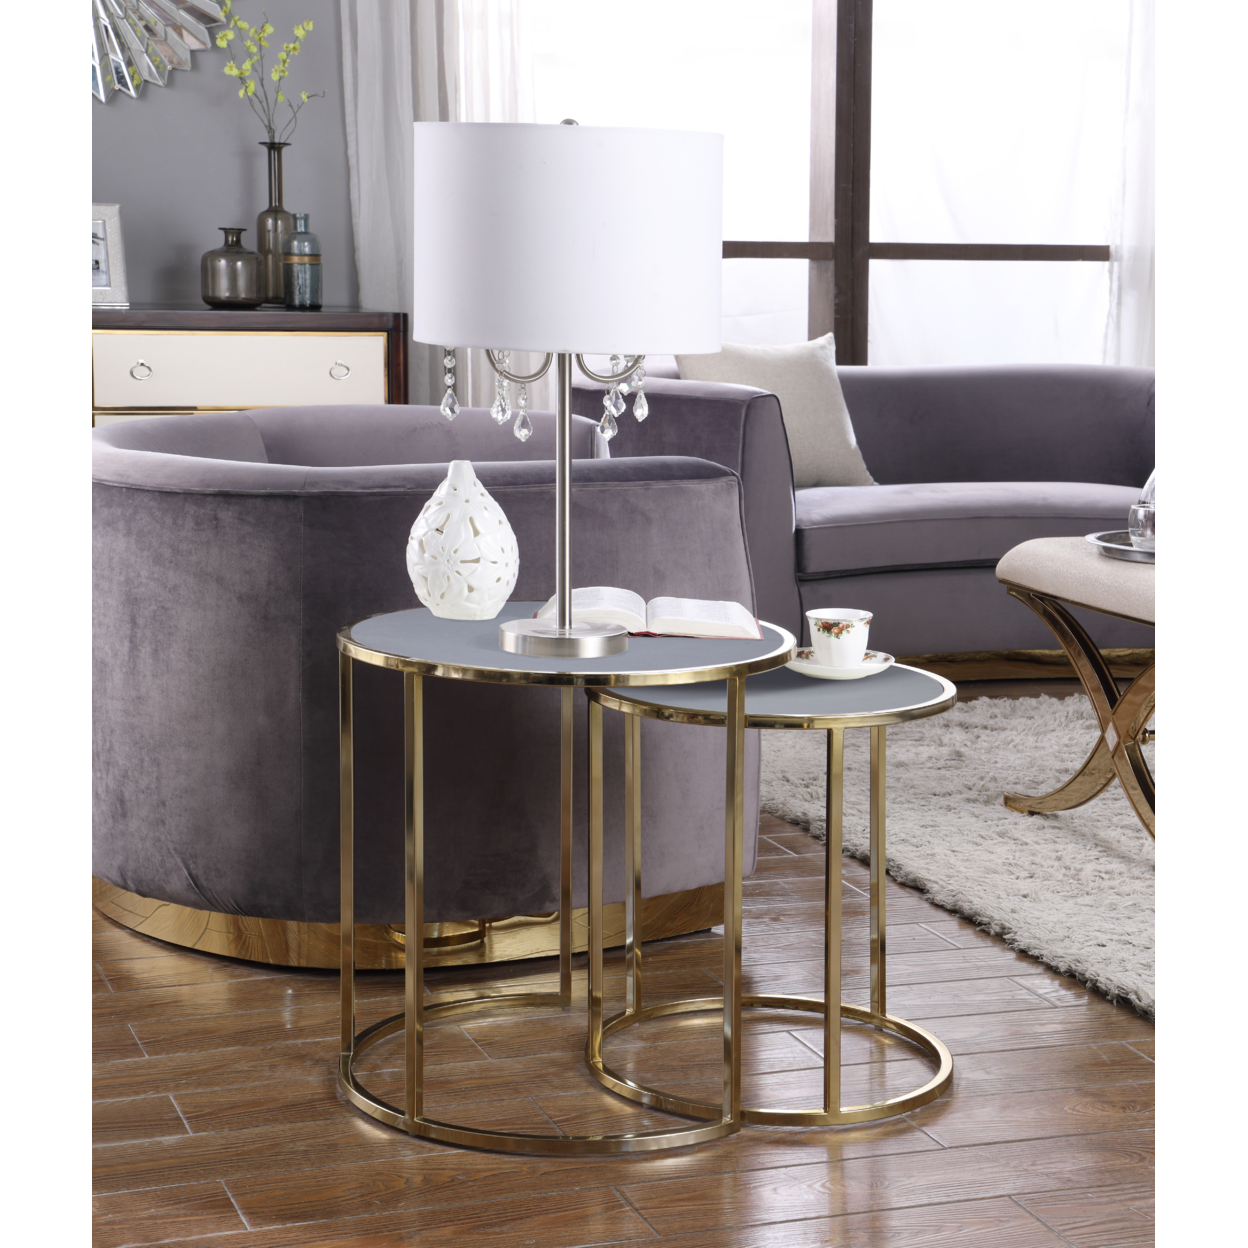 Blayne Nightstand Side Table 2 Piece Set Gold Finished Gibbous Moon Frame PU Leather Top - Grey